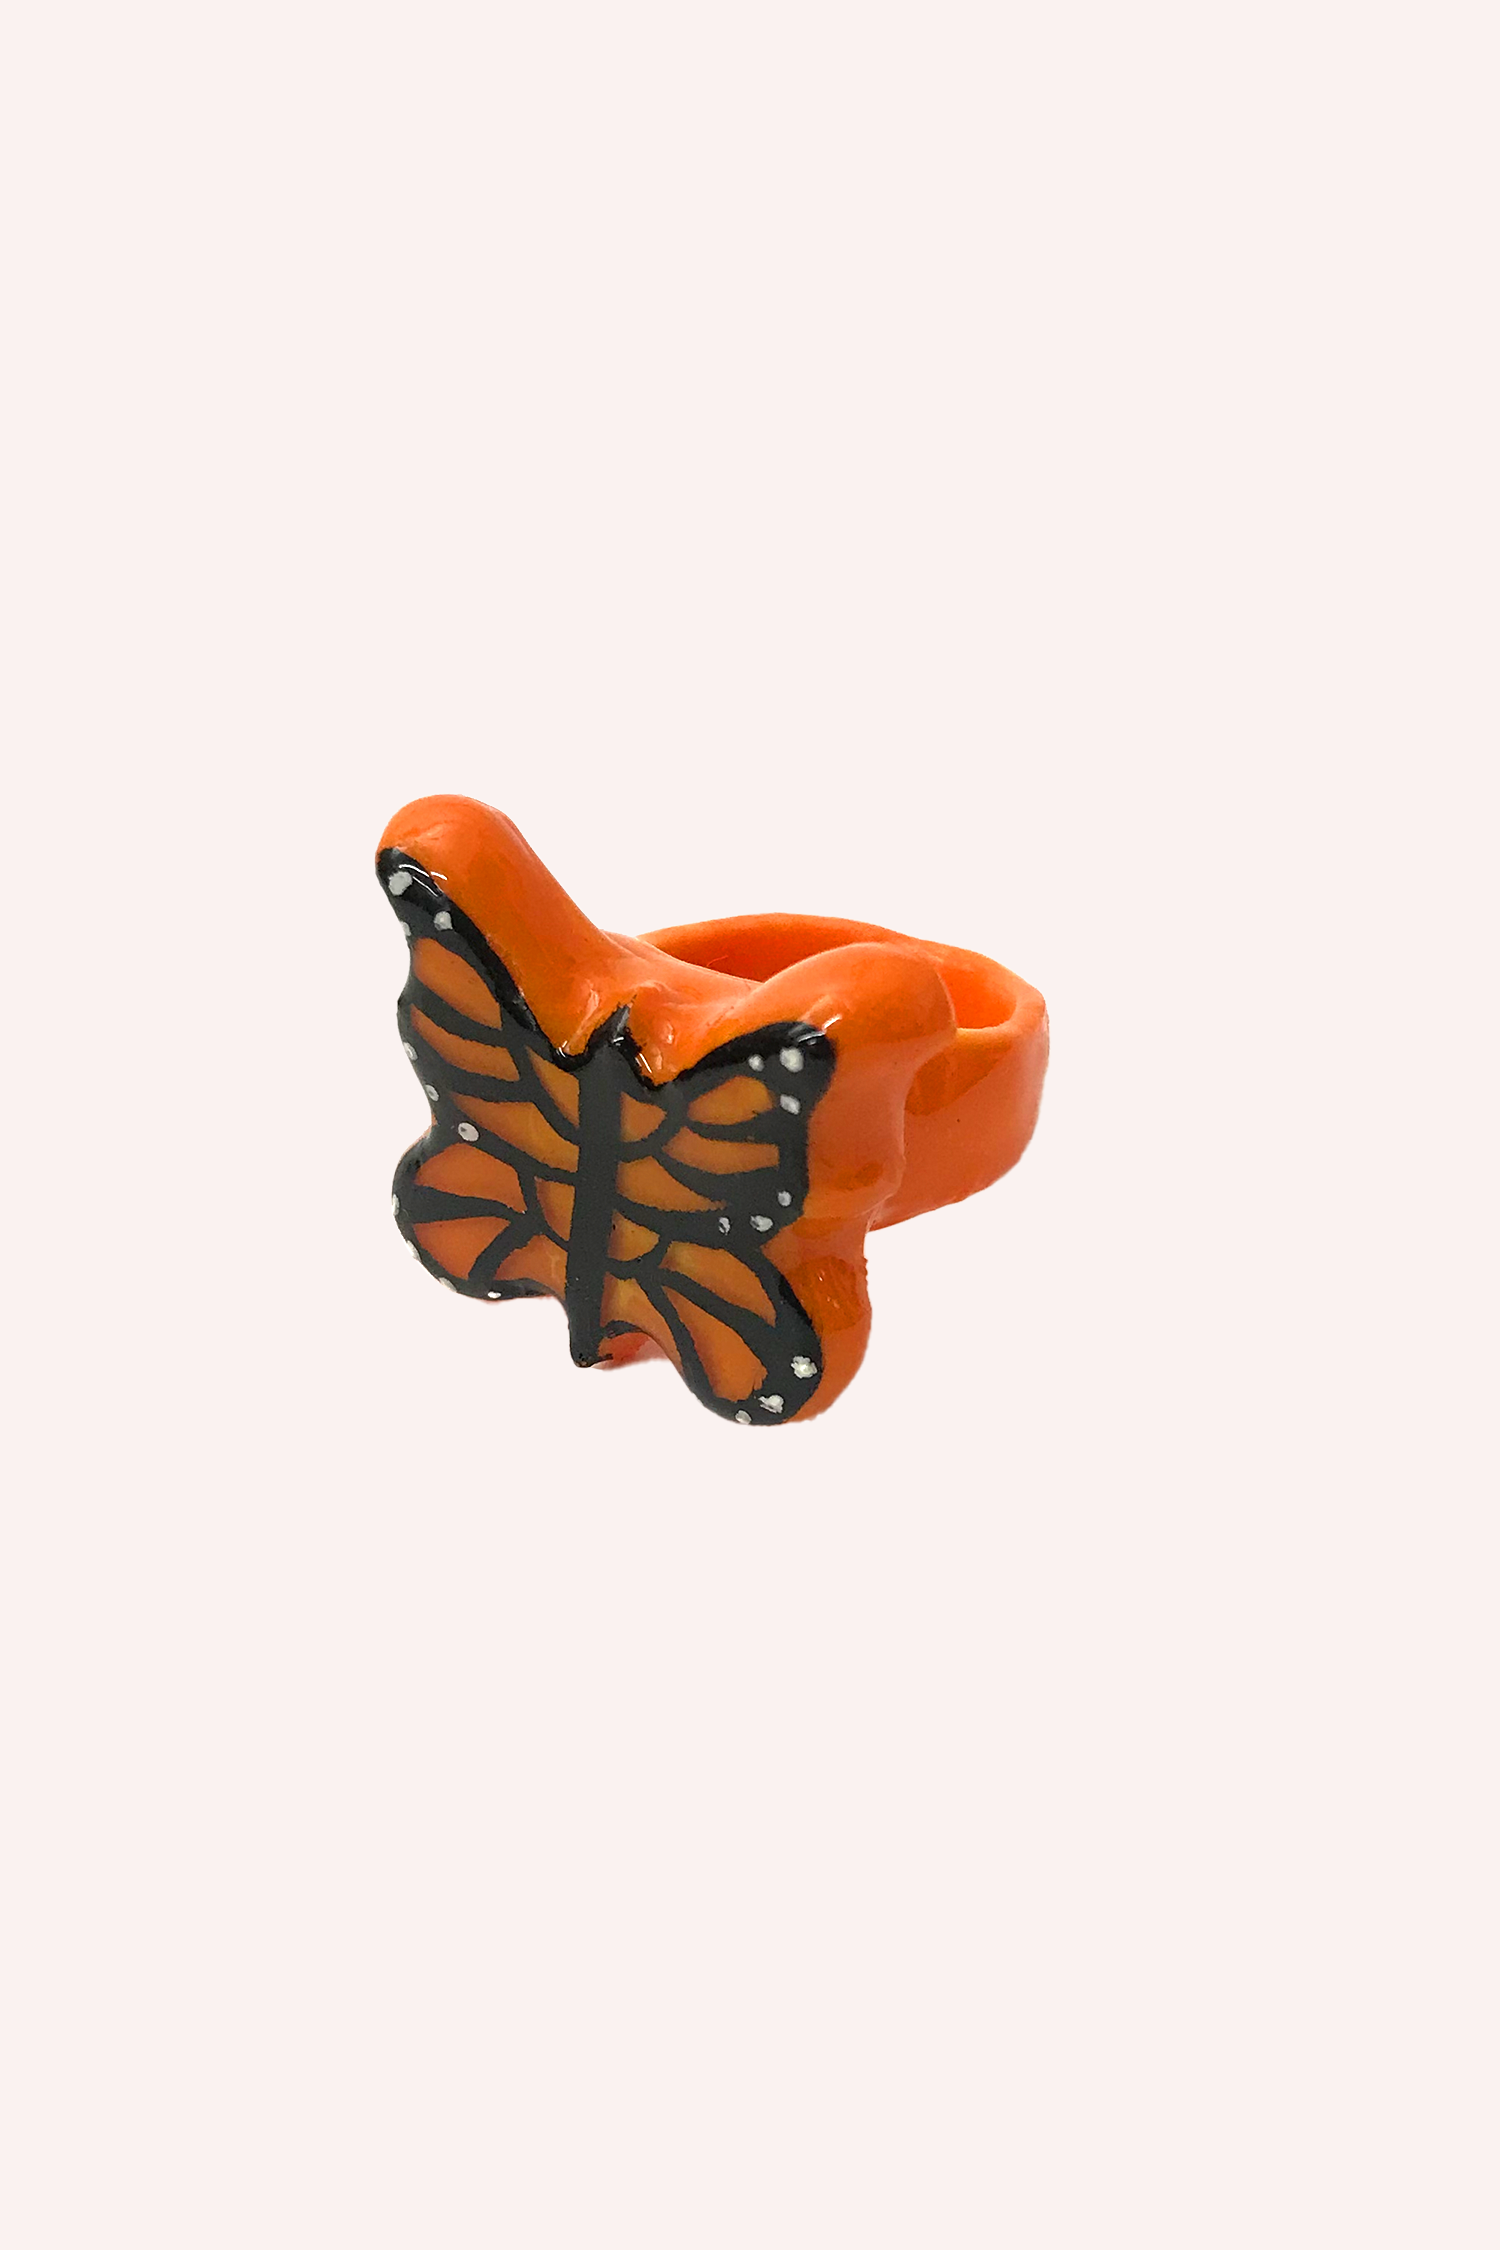 Hand-painted Monarch ring, featuring a solid orange butterfly, black butterfly overlay design